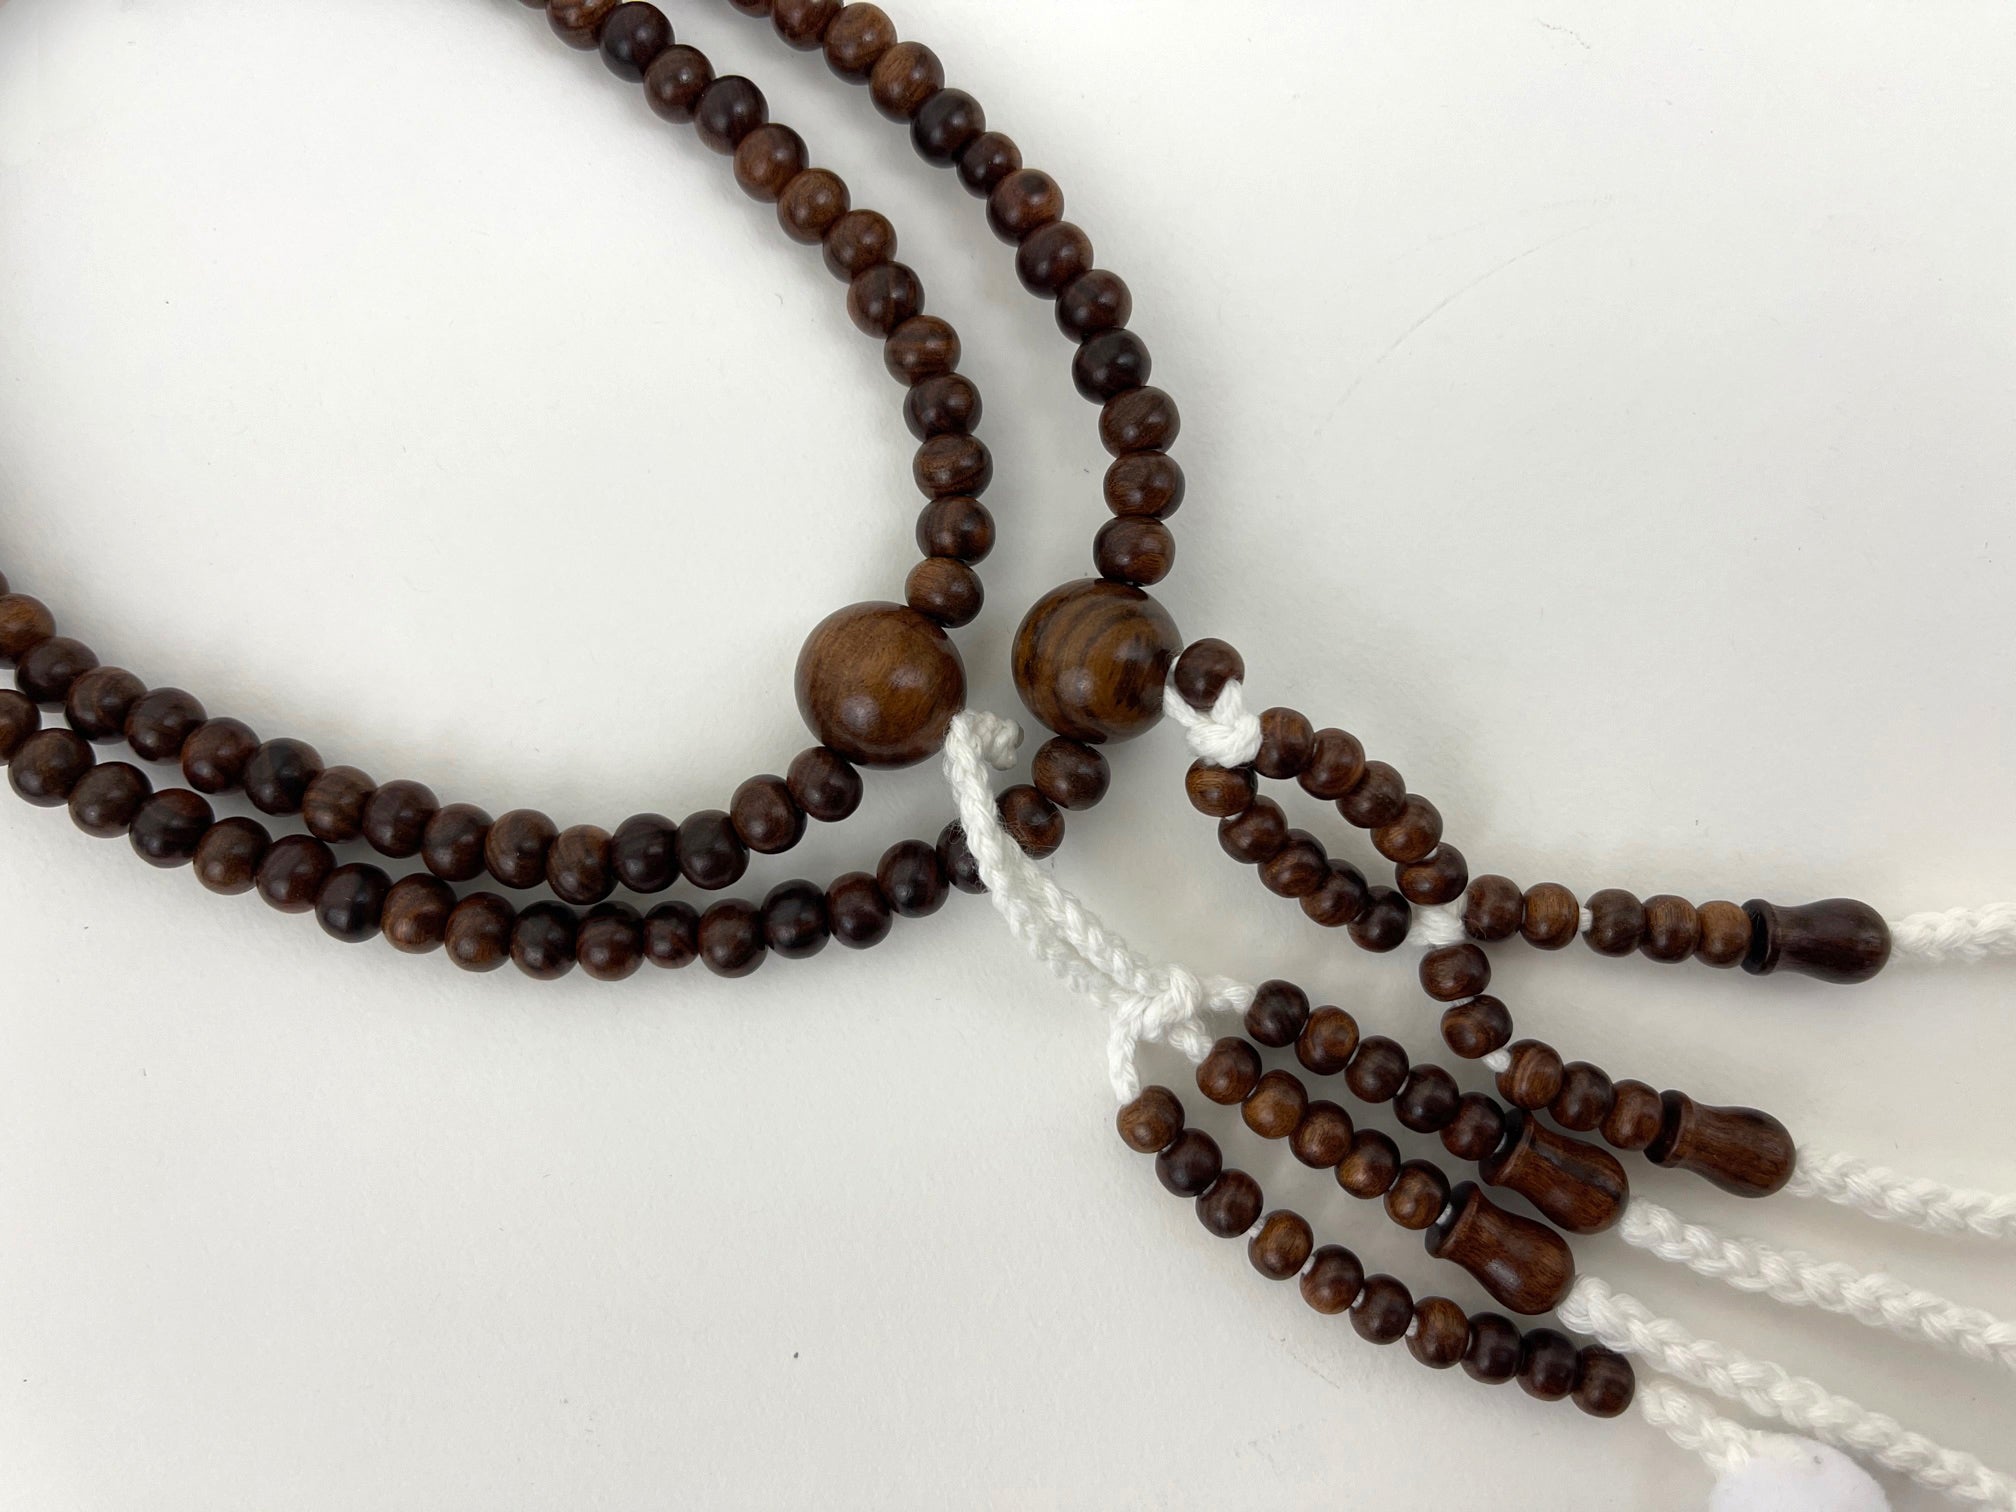 New Sandalwood Beads with Cotton Tassels